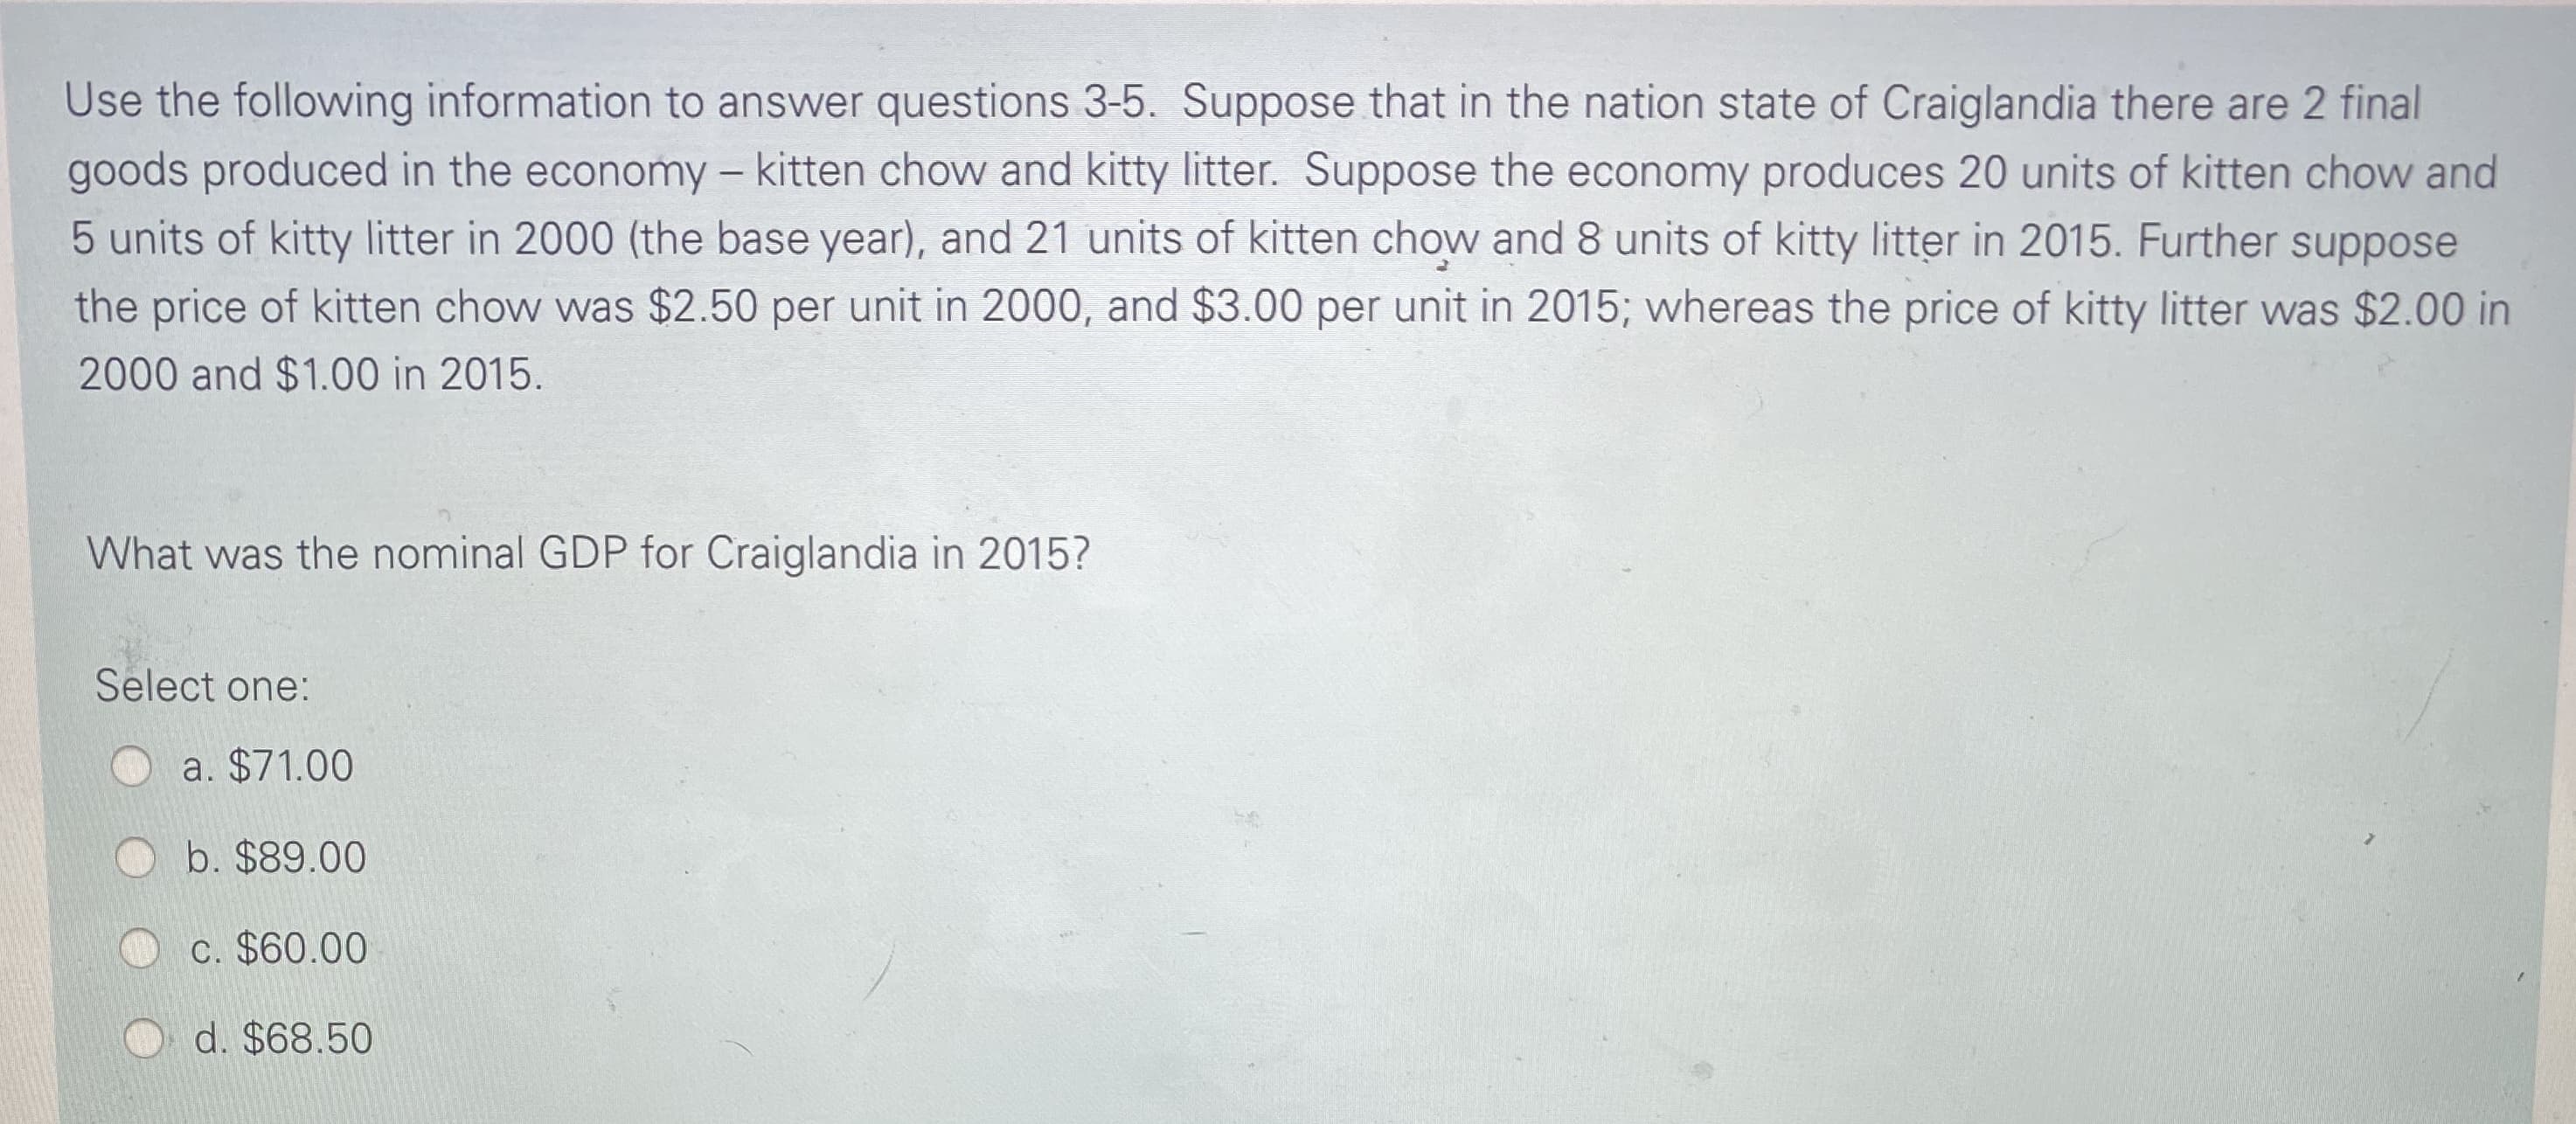 Use the following information to answer questions 3-5. Suppose that in the nation state of Craiglandia there are 2 final
goods produced in the economy – kitten chow and kitty litter. Suppose the economy produces 20 units of kitten chow and
5 units of kitty litter in 2000 (the base year), and 21 units of kitten chow and 8 units of kitty litter in 2015. Further suppose
the price of kitten chow was $2.50 per unit in 2000, and $3.00 per unit in 2015; whereas the price of kitty litter was $2.00 in
2000 and $1.00 in 2015.
What was the nominal GDP for Craiglandia in 2015?
Select one:
a. $71.00
b. $89.00
C. $60.00
d. $68.50
